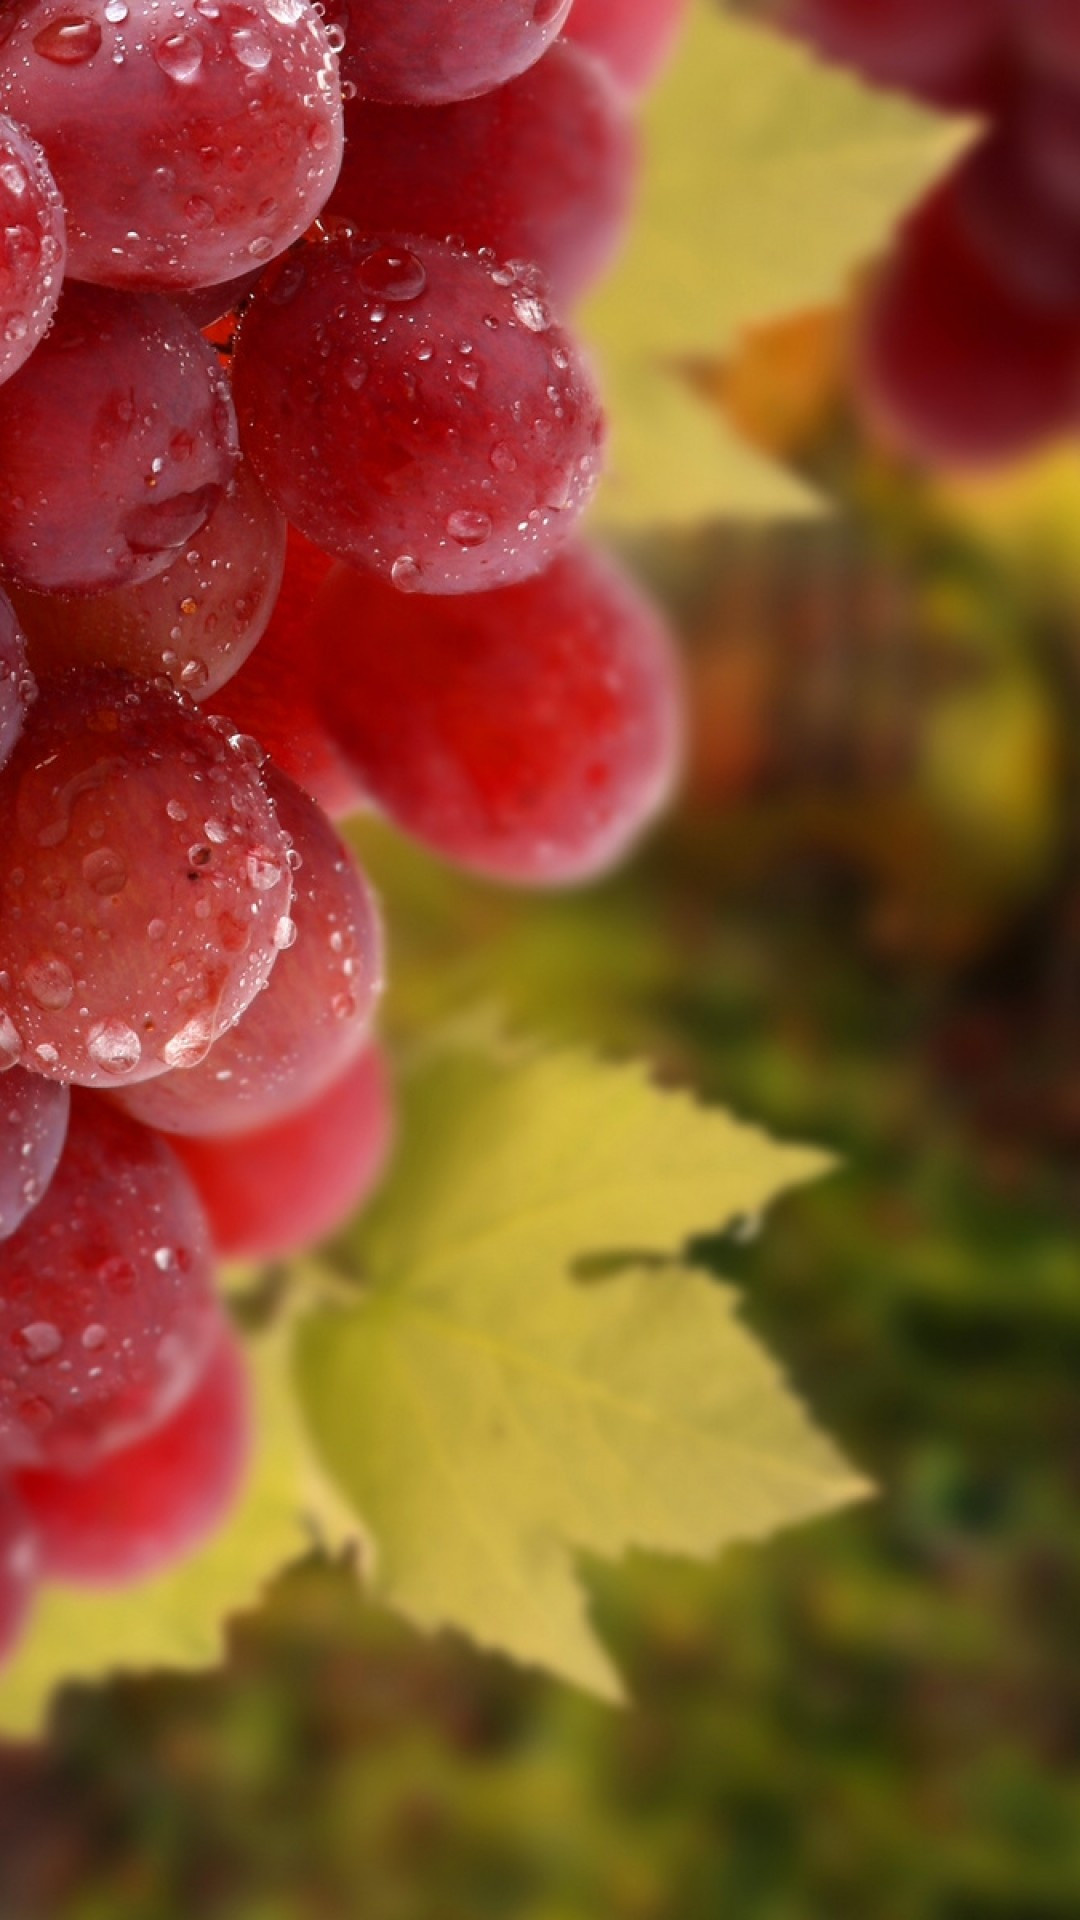 Grapes: Considered to be antioxidant and anti-carcinogenic. 1080x1920 Full HD Wallpaper.